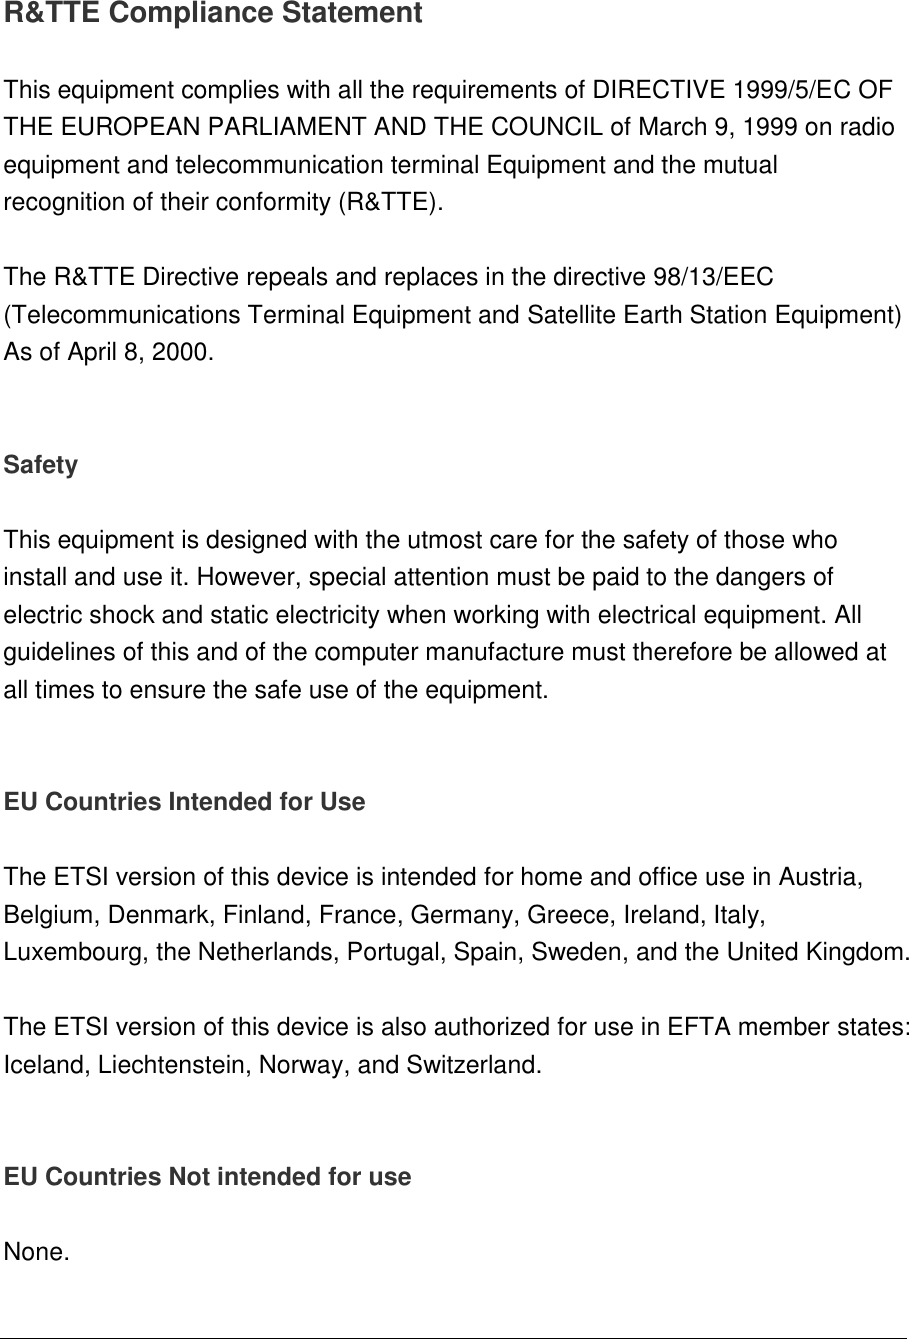   R&amp;TTE Compliance Statement  This equipment complies with all the requirements of DIRECTIVE 1999/5/EC OF THE EUROPEAN PARLIAMENT AND THE COUNCIL of March 9, 1999 on radio equipment and telecommunication terminal Equipment and the mutual recognition of their conformity (R&amp;TTE).  The R&amp;TTE Directive repeals and replaces in the directive 98/13/EEC (Telecommunications Terminal Equipment and Satellite Earth Station Equipment) As of April 8, 2000.   Safety  This equipment is designed with the utmost care for the safety of those who install and use it. However, special attention must be paid to the dangers of electric shock and static electricity when working with electrical equipment. All guidelines of this and of the computer manufacture must therefore be allowed at all times to ensure the safe use of the equipment.   EU Countries Intended for Use   The ETSI version of this device is intended for home and office use in Austria, Belgium, Denmark, Finland, France, Germany, Greece, Ireland, Italy, Luxembourg, the Netherlands, Portugal, Spain, Sweden, and the United Kingdom.  The ETSI version of this device is also authorized for use in EFTA member states: Iceland, Liechtenstein, Norway, and Switzerland.   EU Countries Not intended for use   None.   